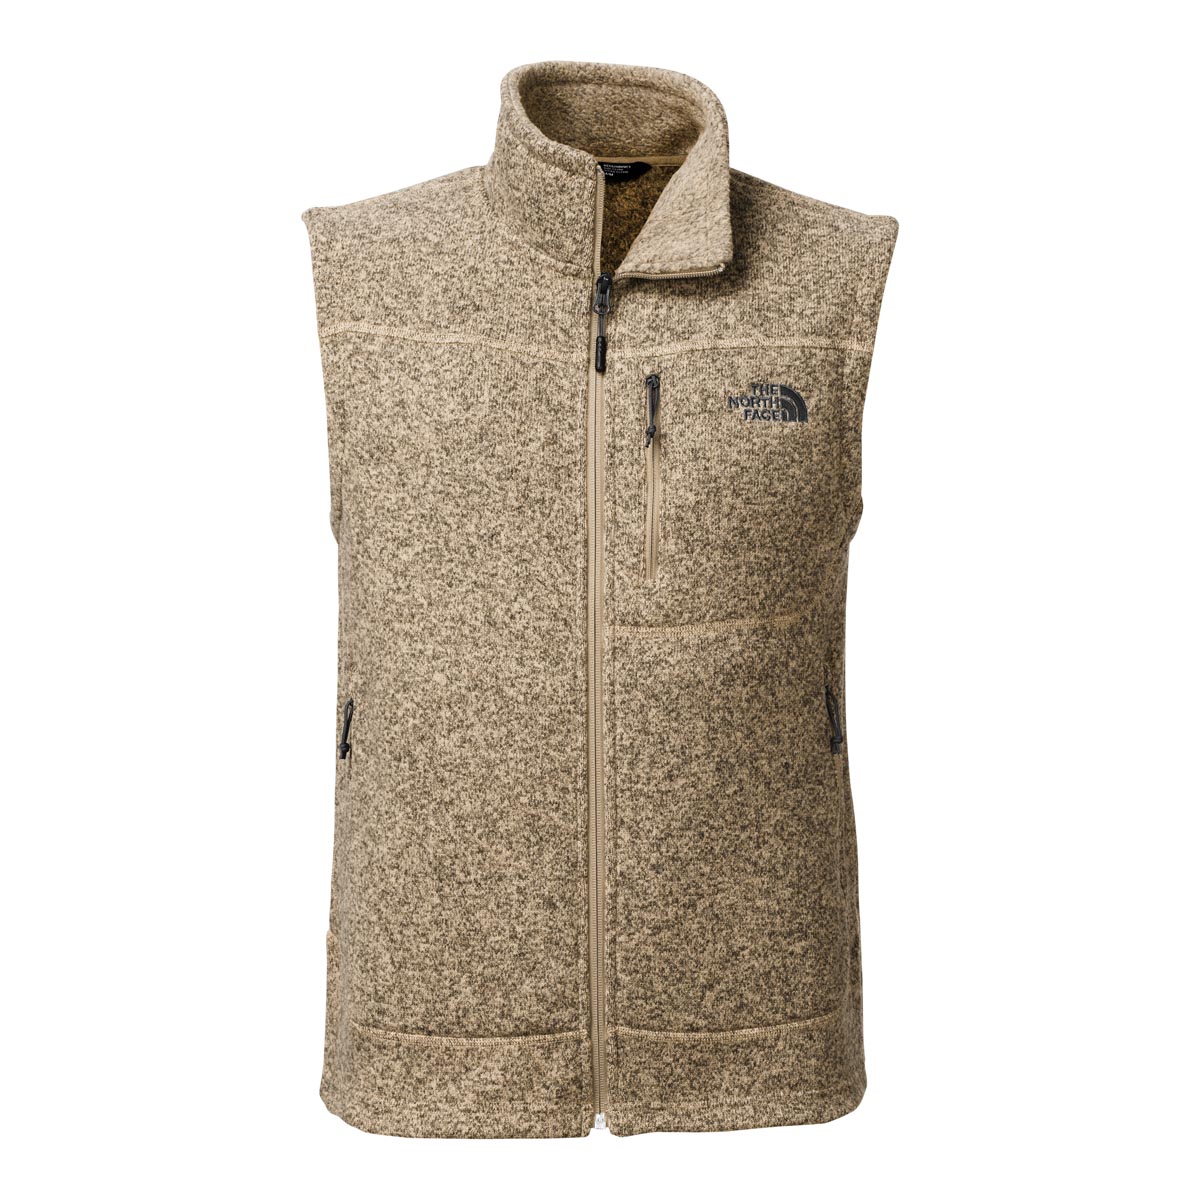 The North Face Mens Gordon Lyons Vest Discontinued Pricing